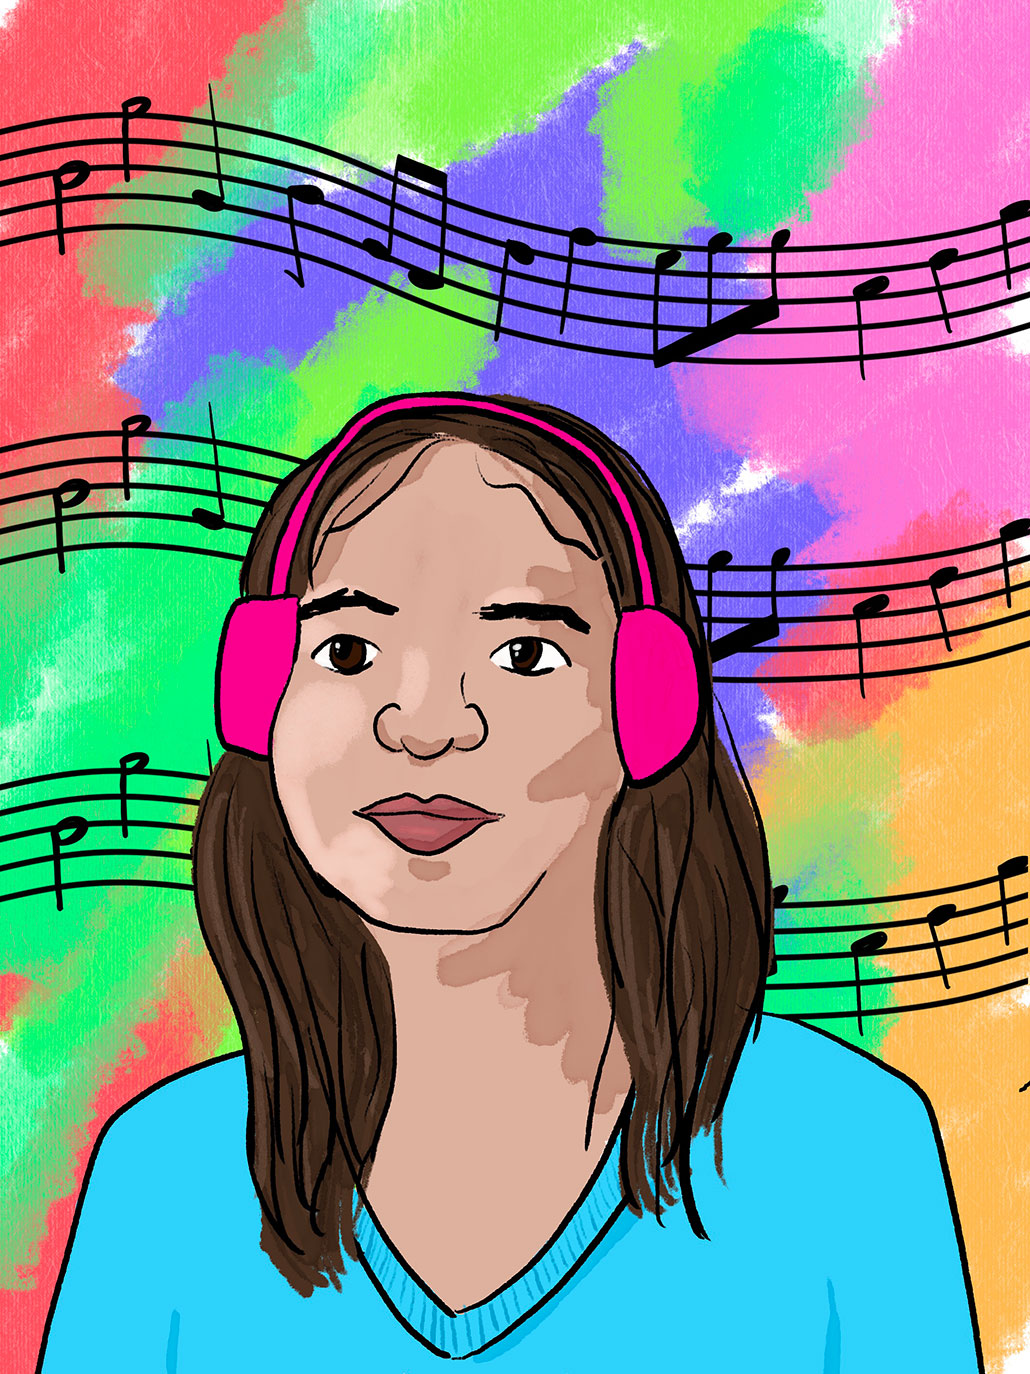 an illustration of a young woman with shoulder length brown hair wearing pink headphones. Behind her is a multicolored backgroup with musical score 